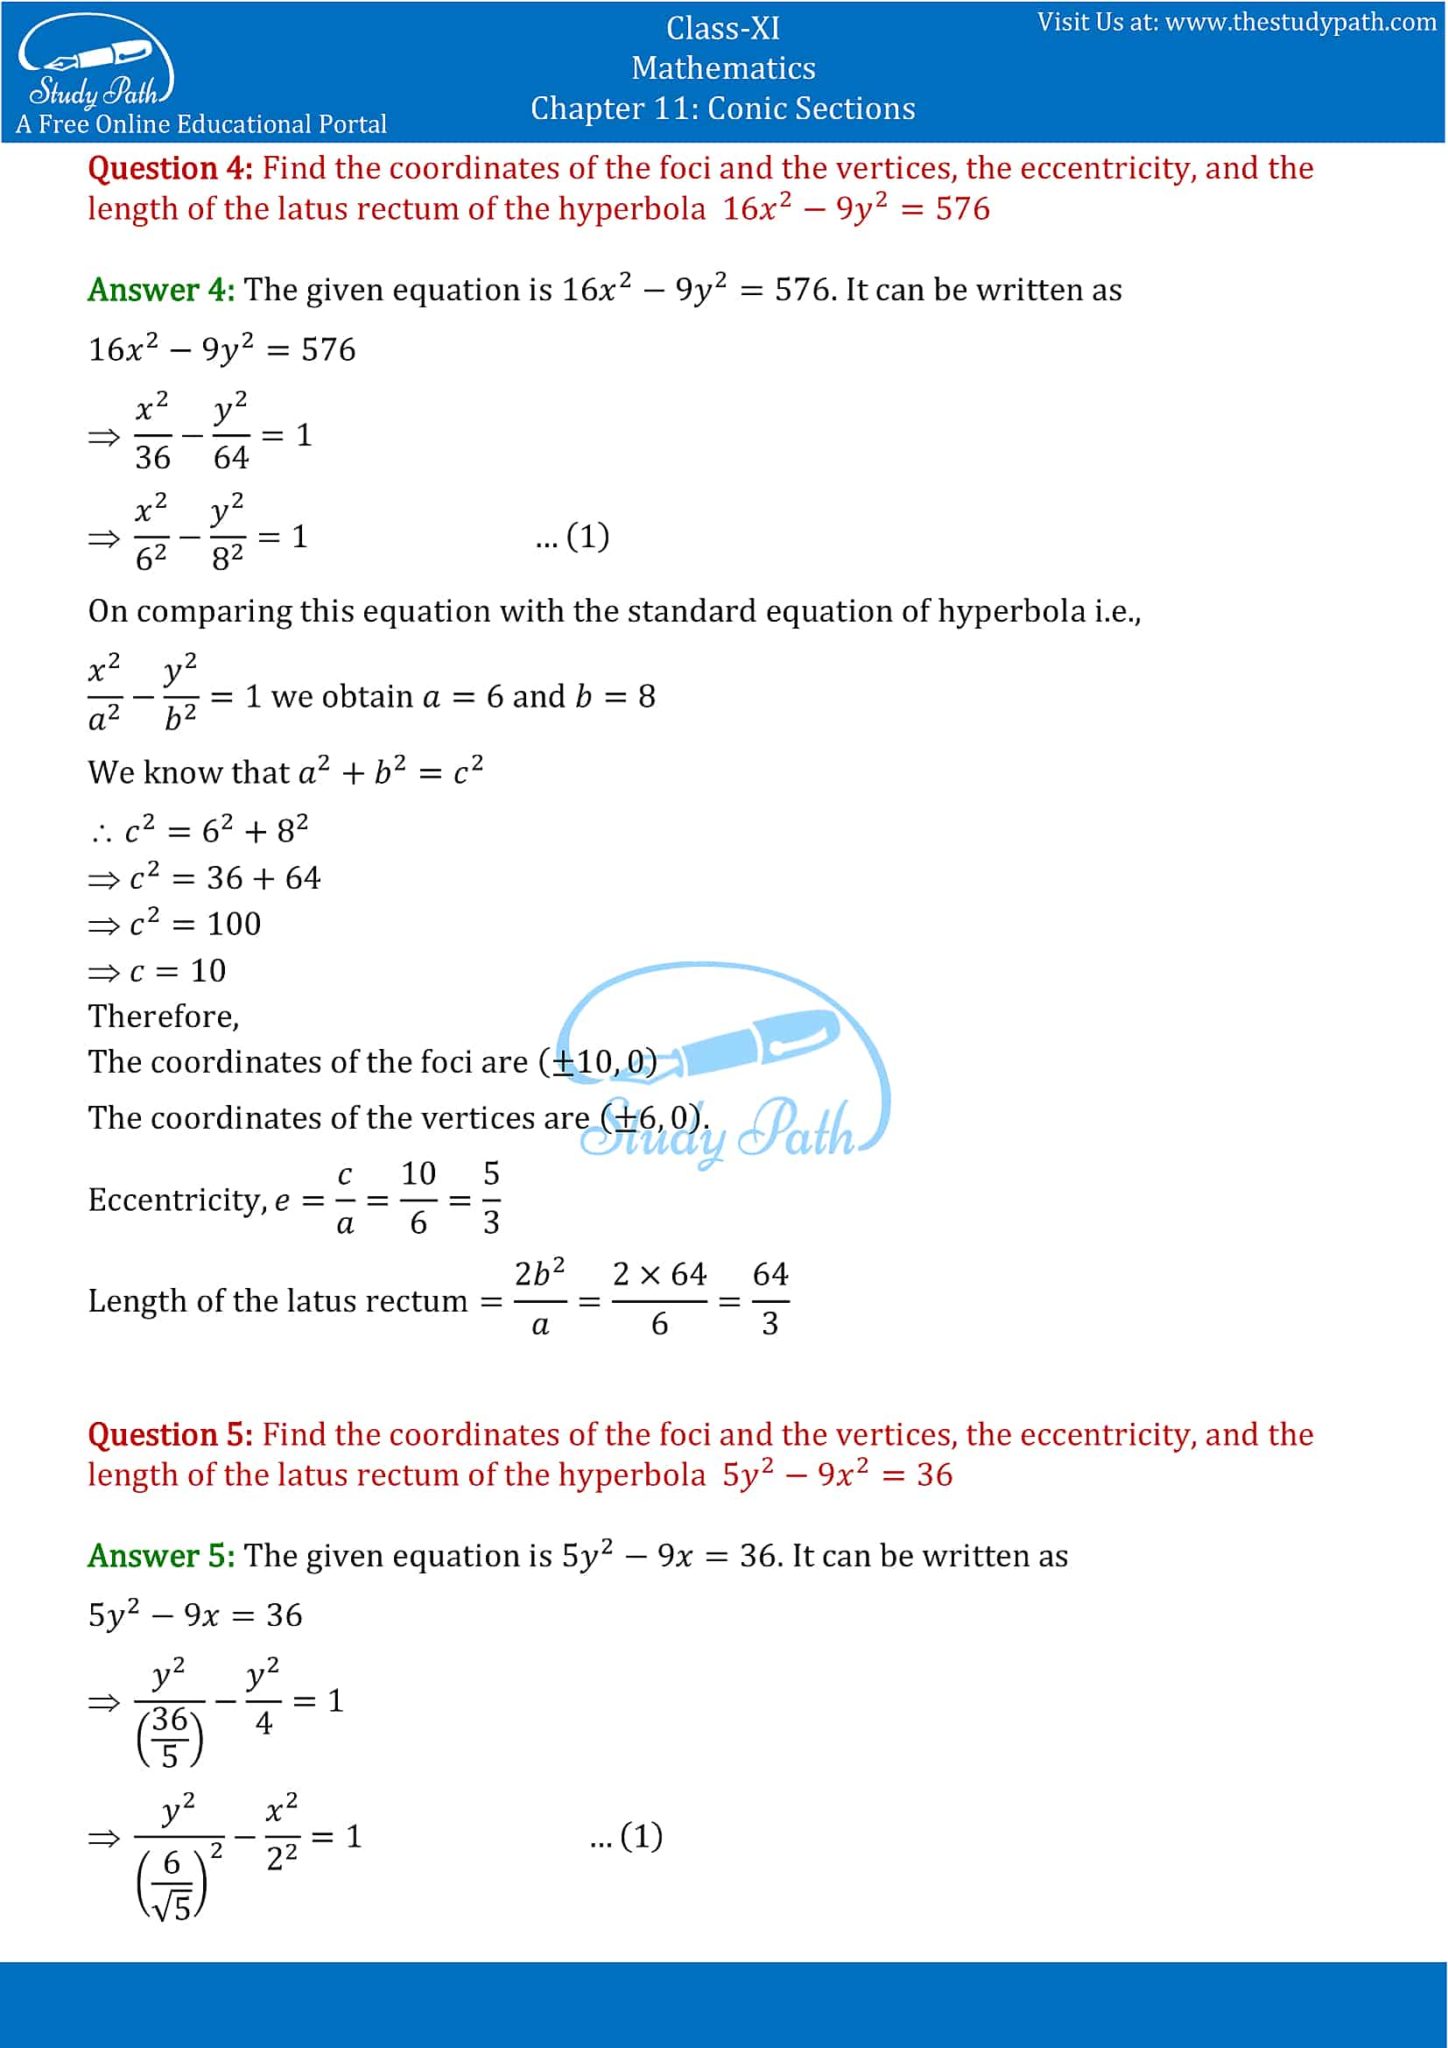 case study questions for class 11 maths chapter 3